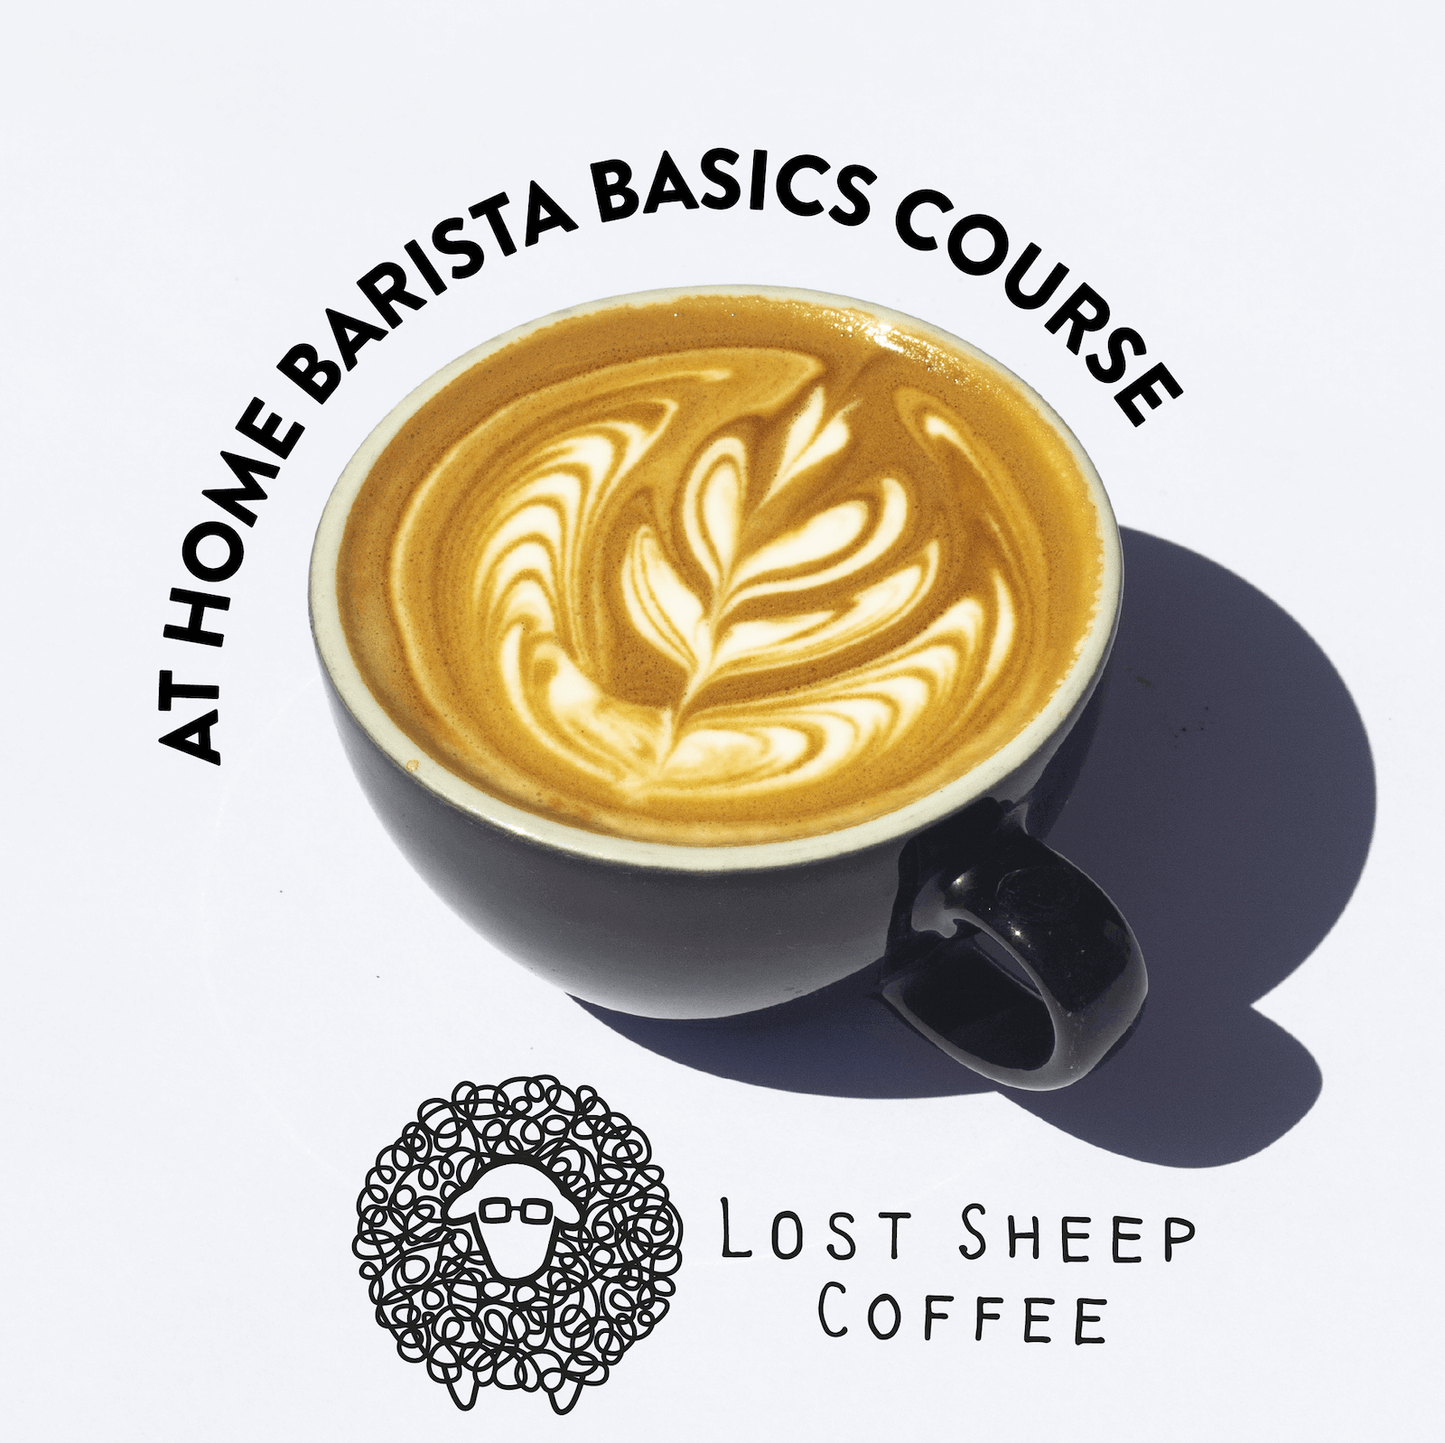 A flat white coffee made on Home Barista Basics course - A Lost Sheep Coffee Experience